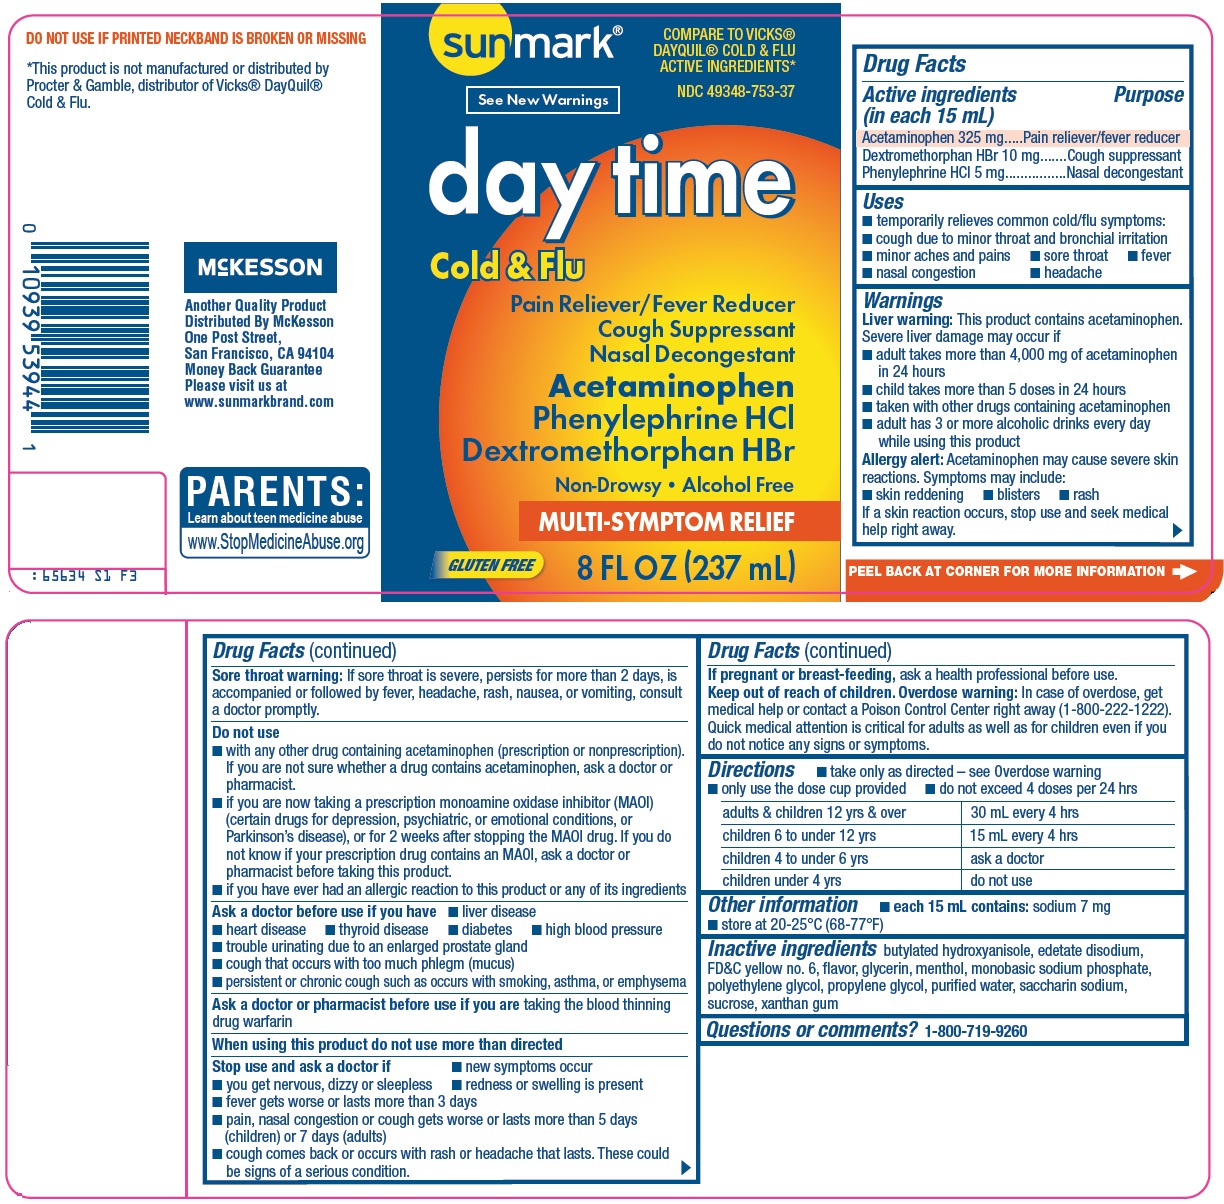 Sunmark Day Time Cold & Flu